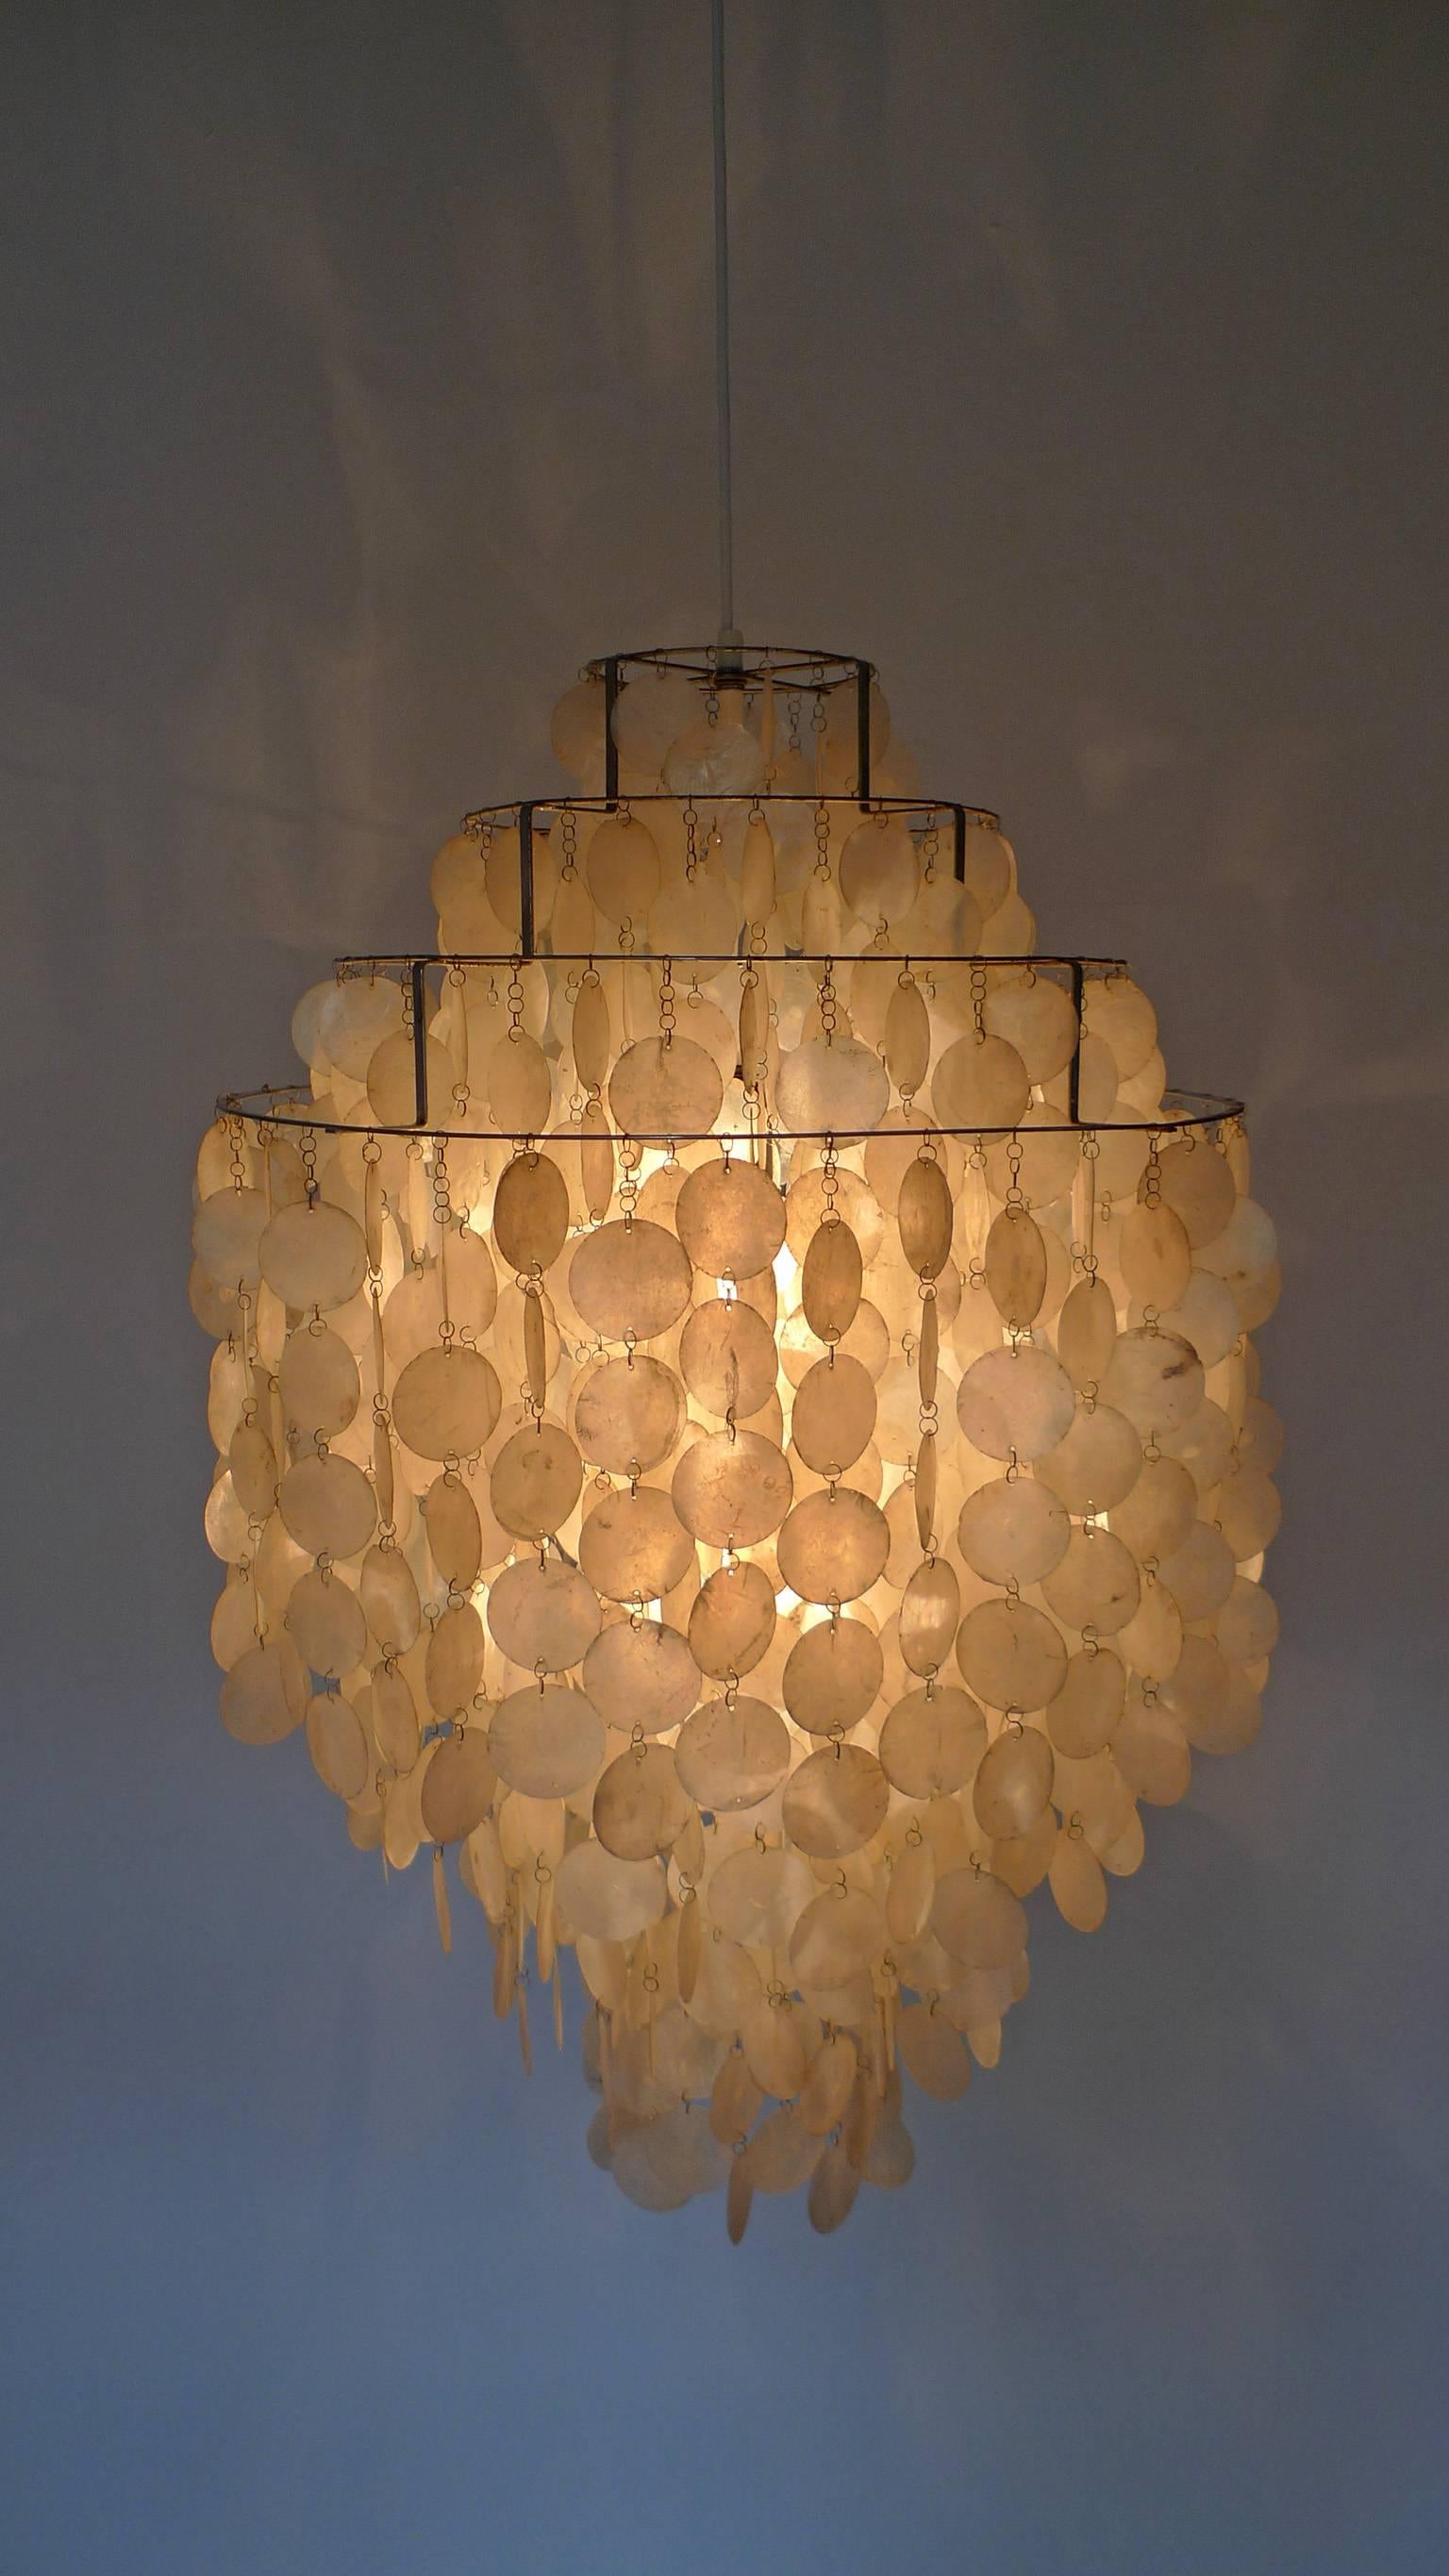 First Series Fun 0 DM Chandelier by Verner Panton for J. Luber Ag, Switzerland In Good Condition For Sale In Berlin, DE